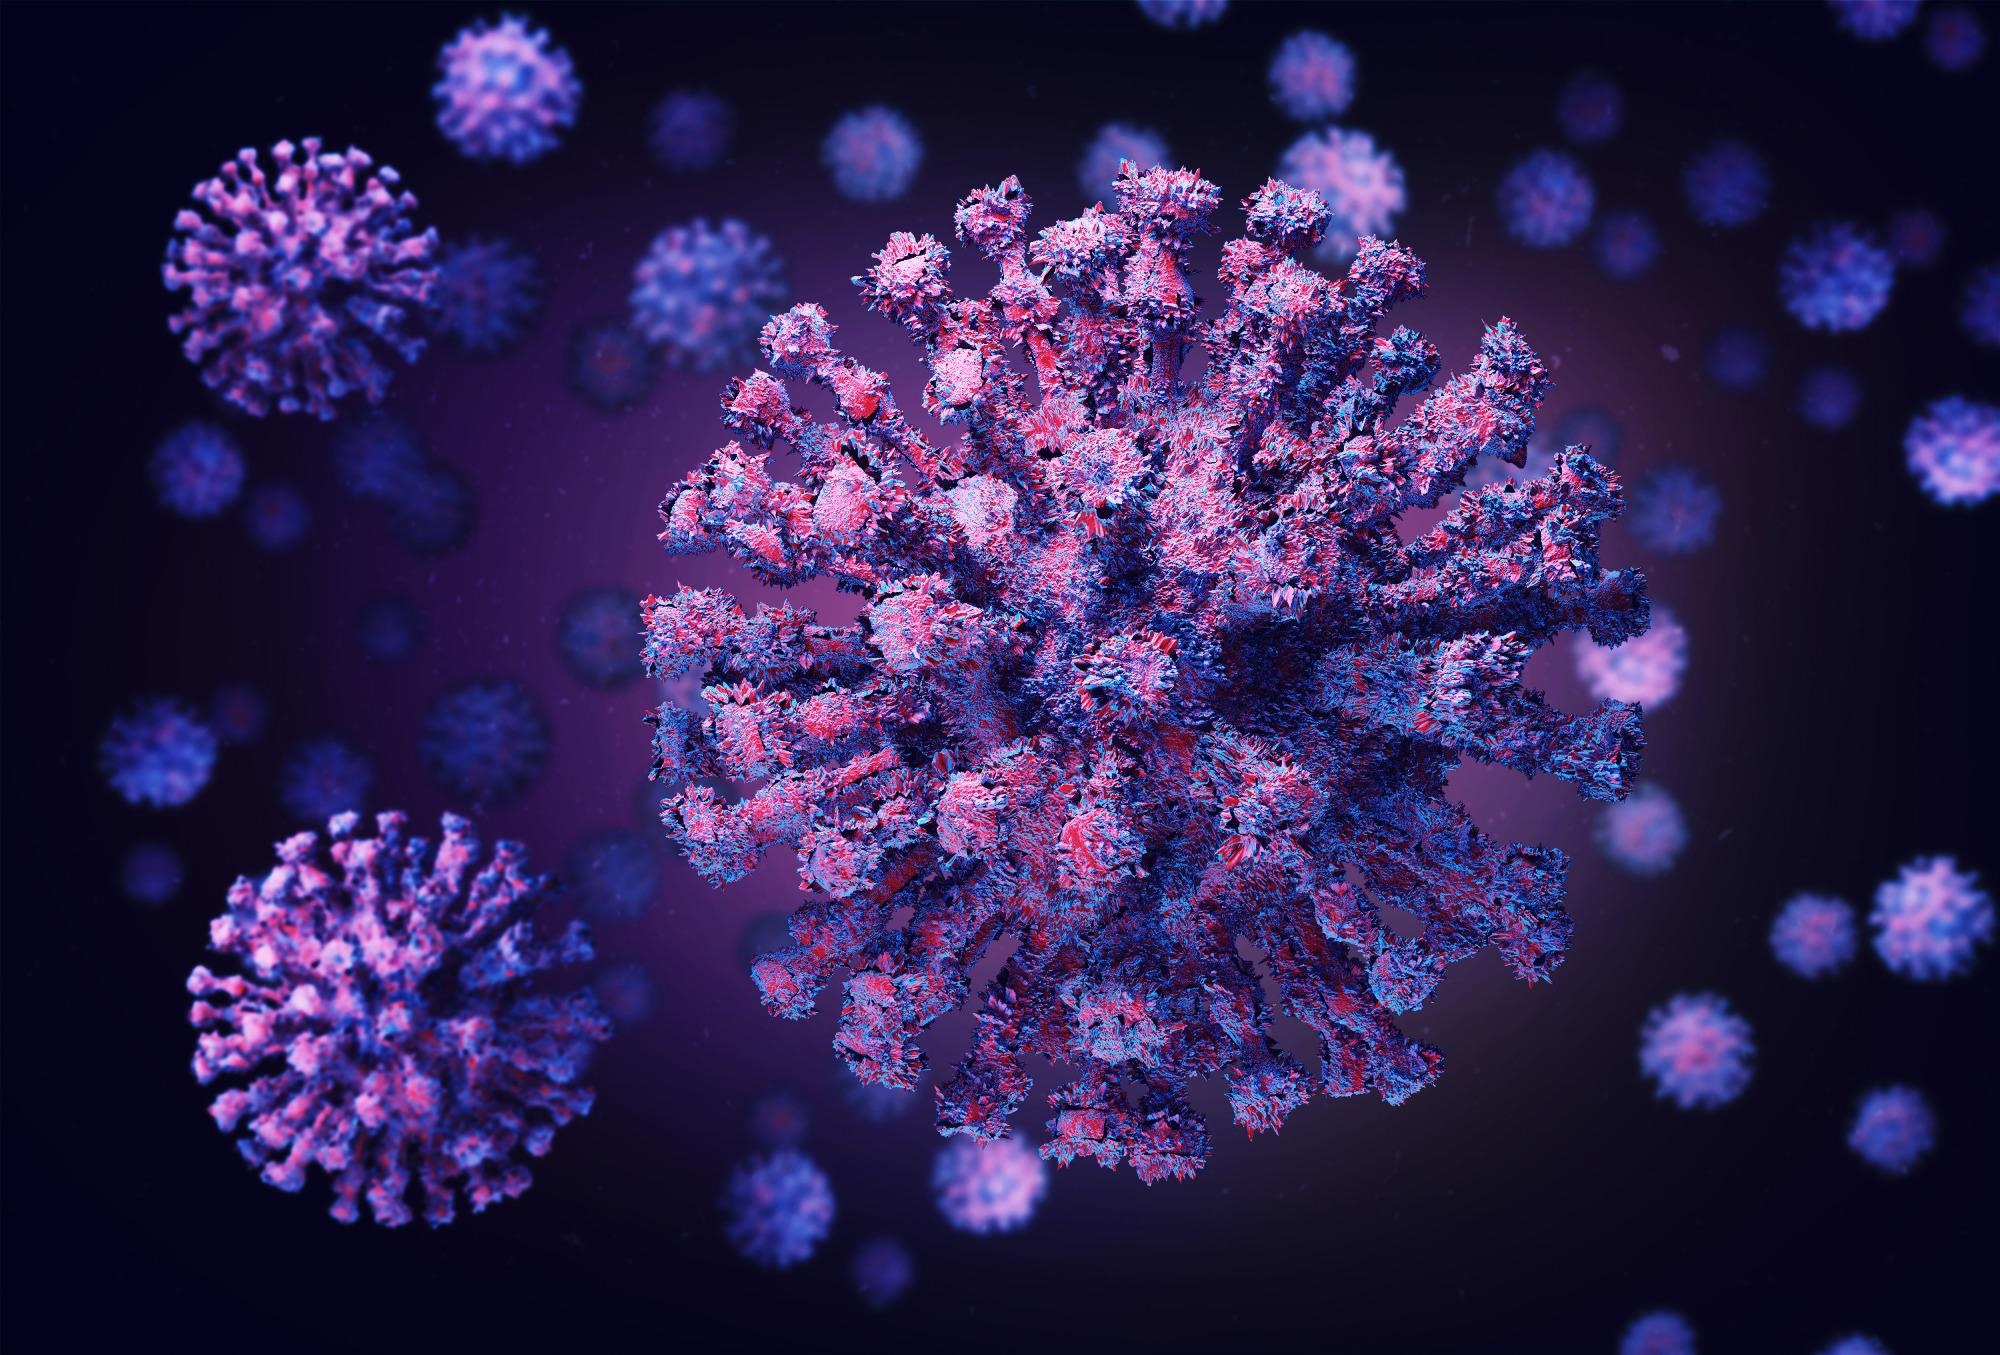 Study: High body temperature increases gut microbiota-dependent host resistance to influenza A virus and SARS-CoV-2 infection. Image Credit: iunewind / Shutterstock